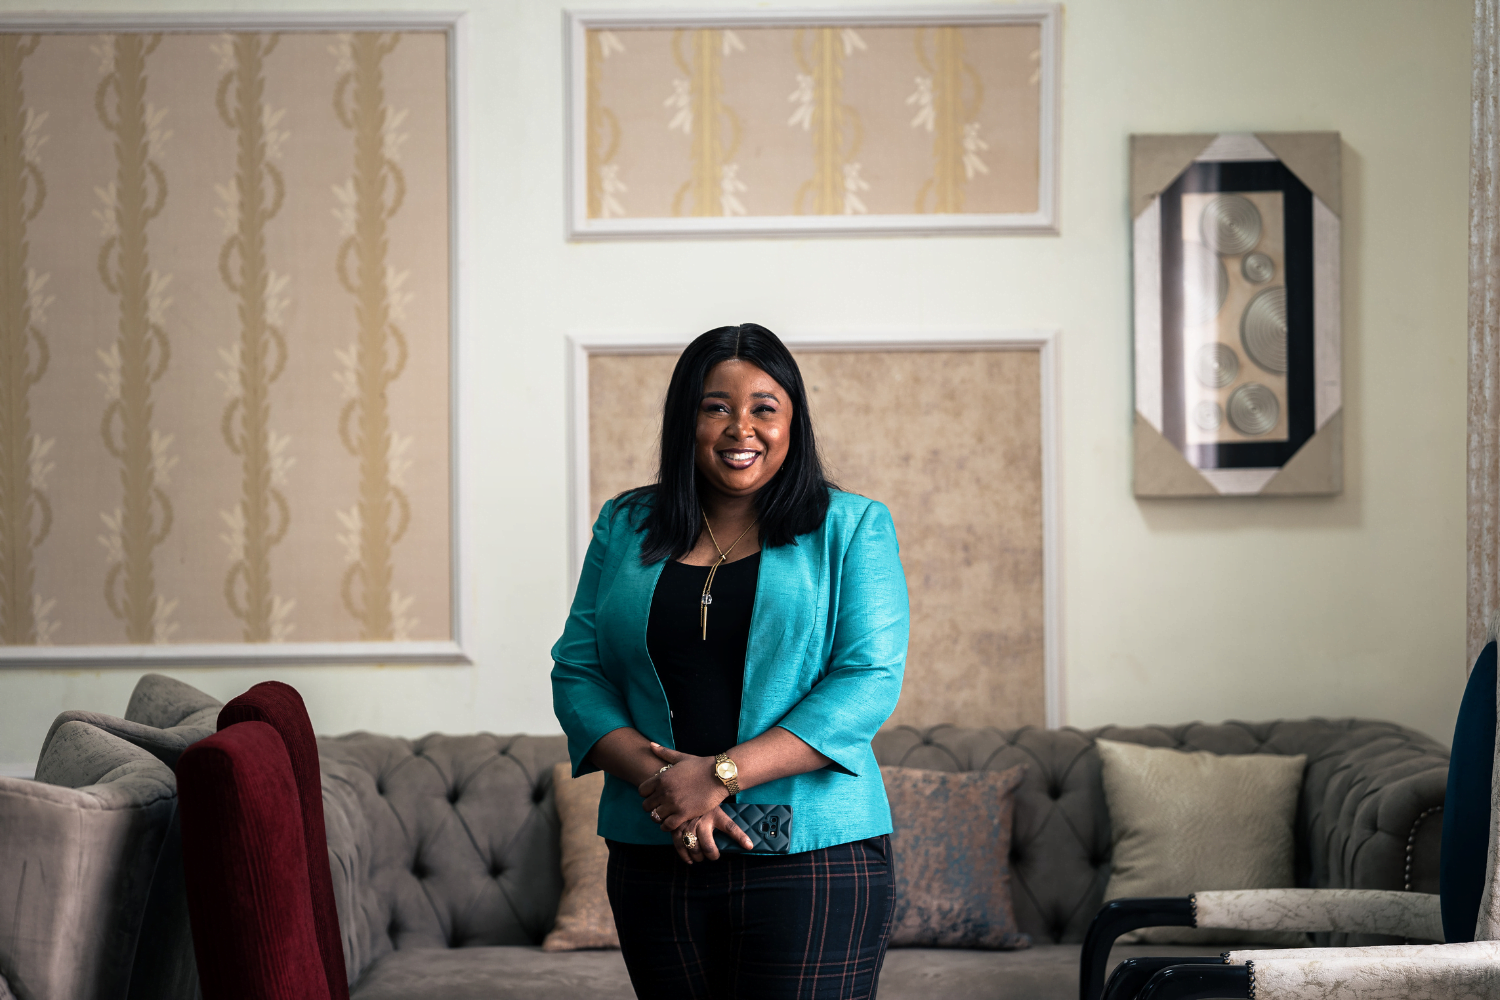 Glory Omoregie, CEO of Home Craft Interiors and Projects in Lagos, Nigeria poses in front of furniture at her interior design company.